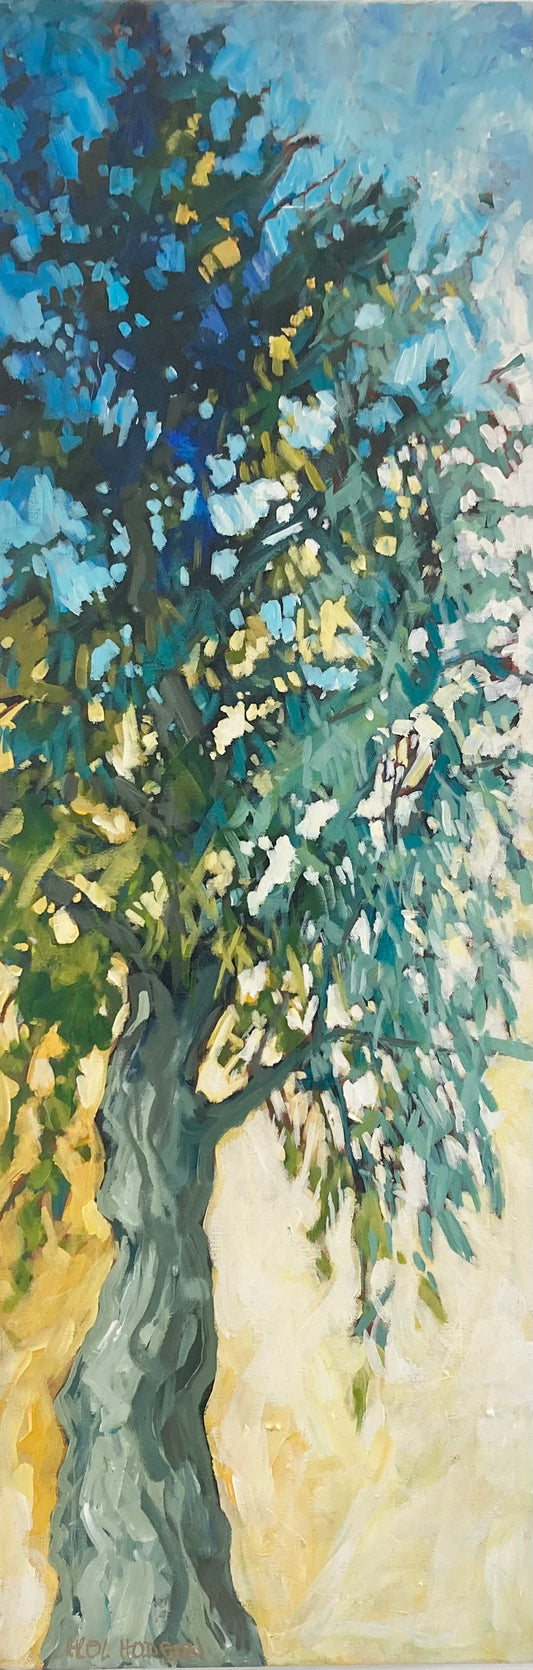 Image of a tall acrylic painting of a tree